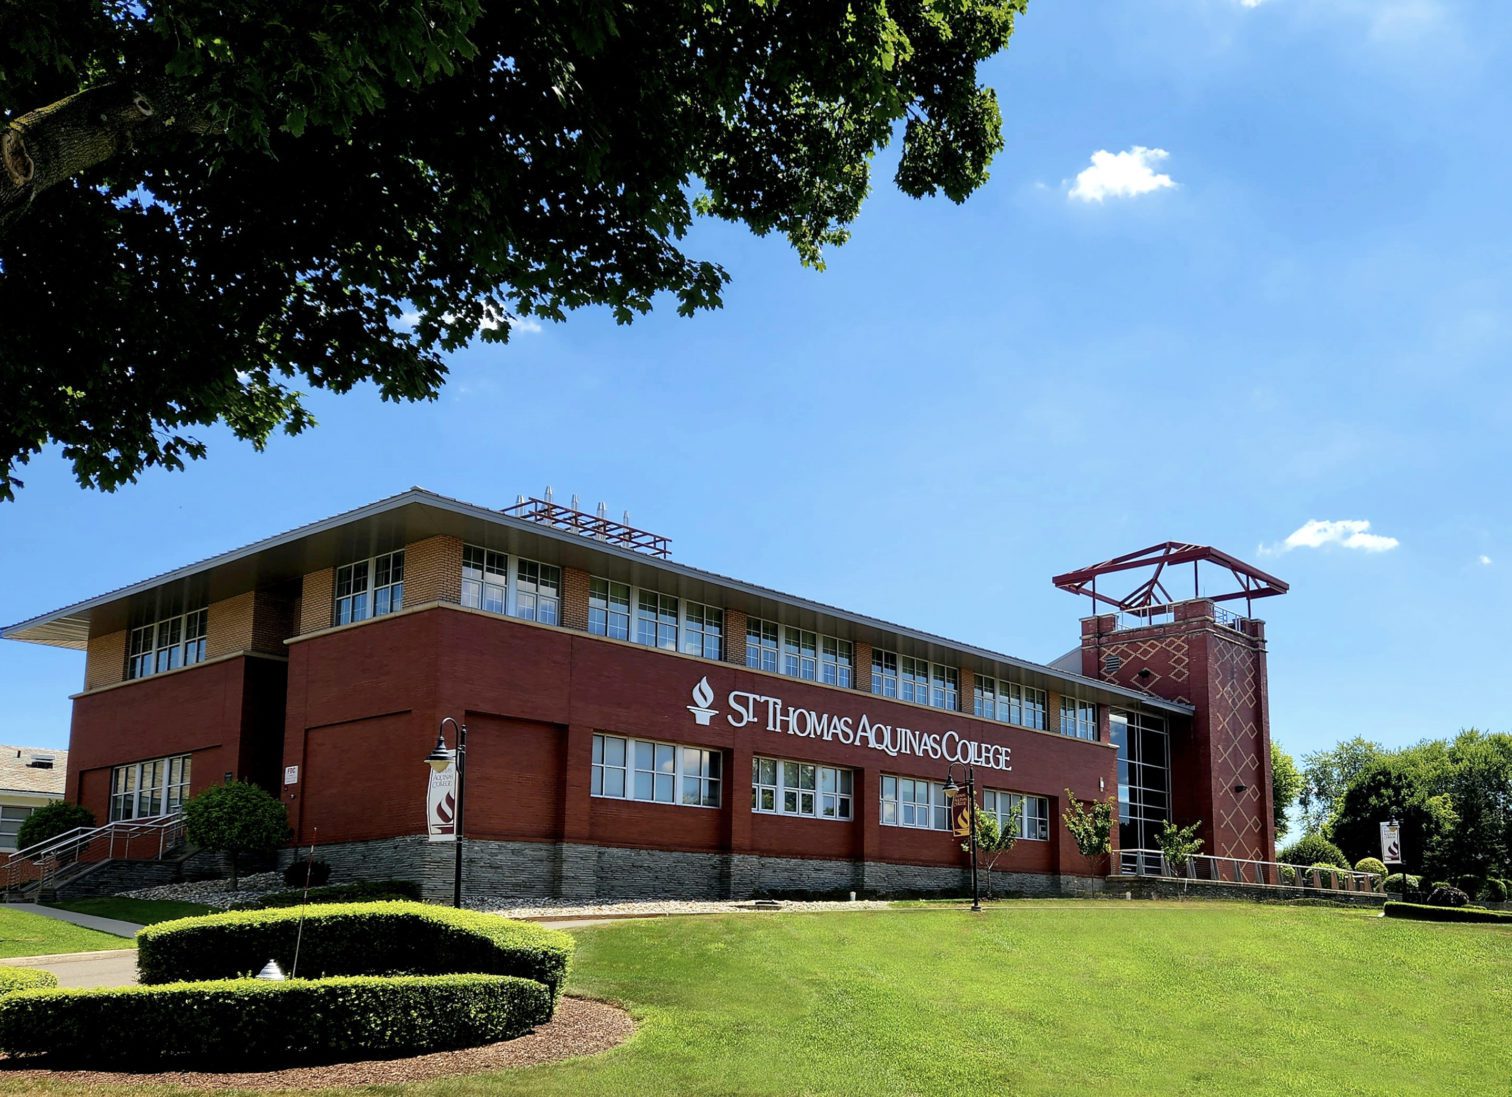 Exterior of Costello Hall building with St. Thomas Aquinas College logo